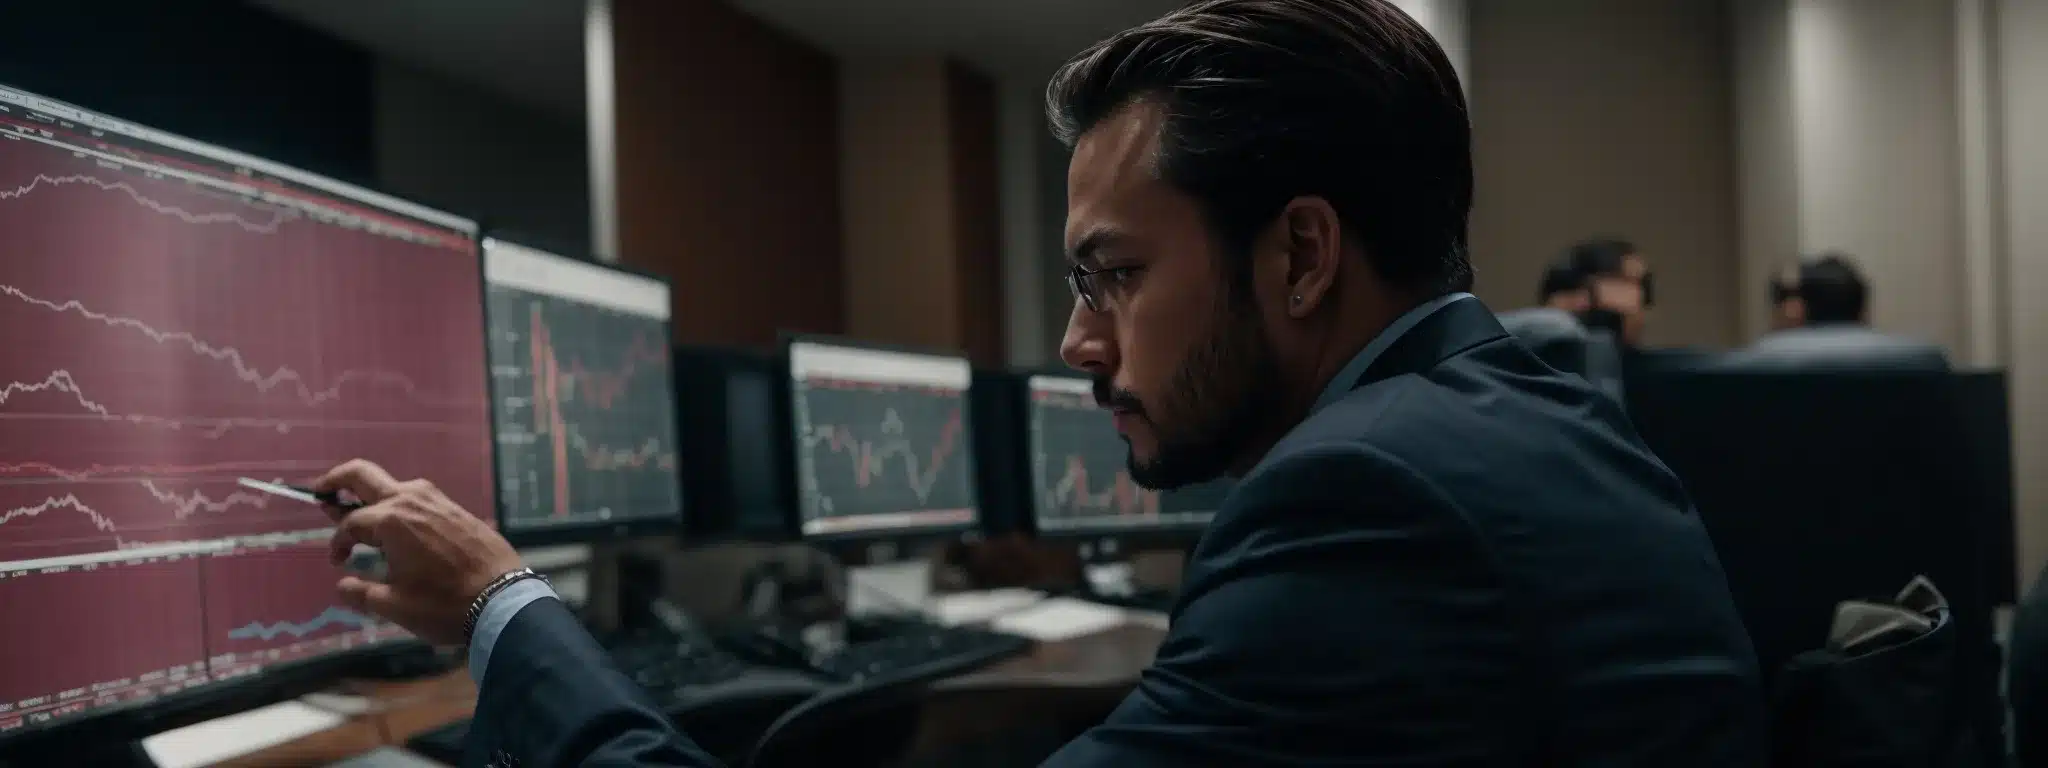 A Financial Advisor Intently Studies Graphs And Charts On A Computer Screen, Strategizing On Increasing Brand Equity.